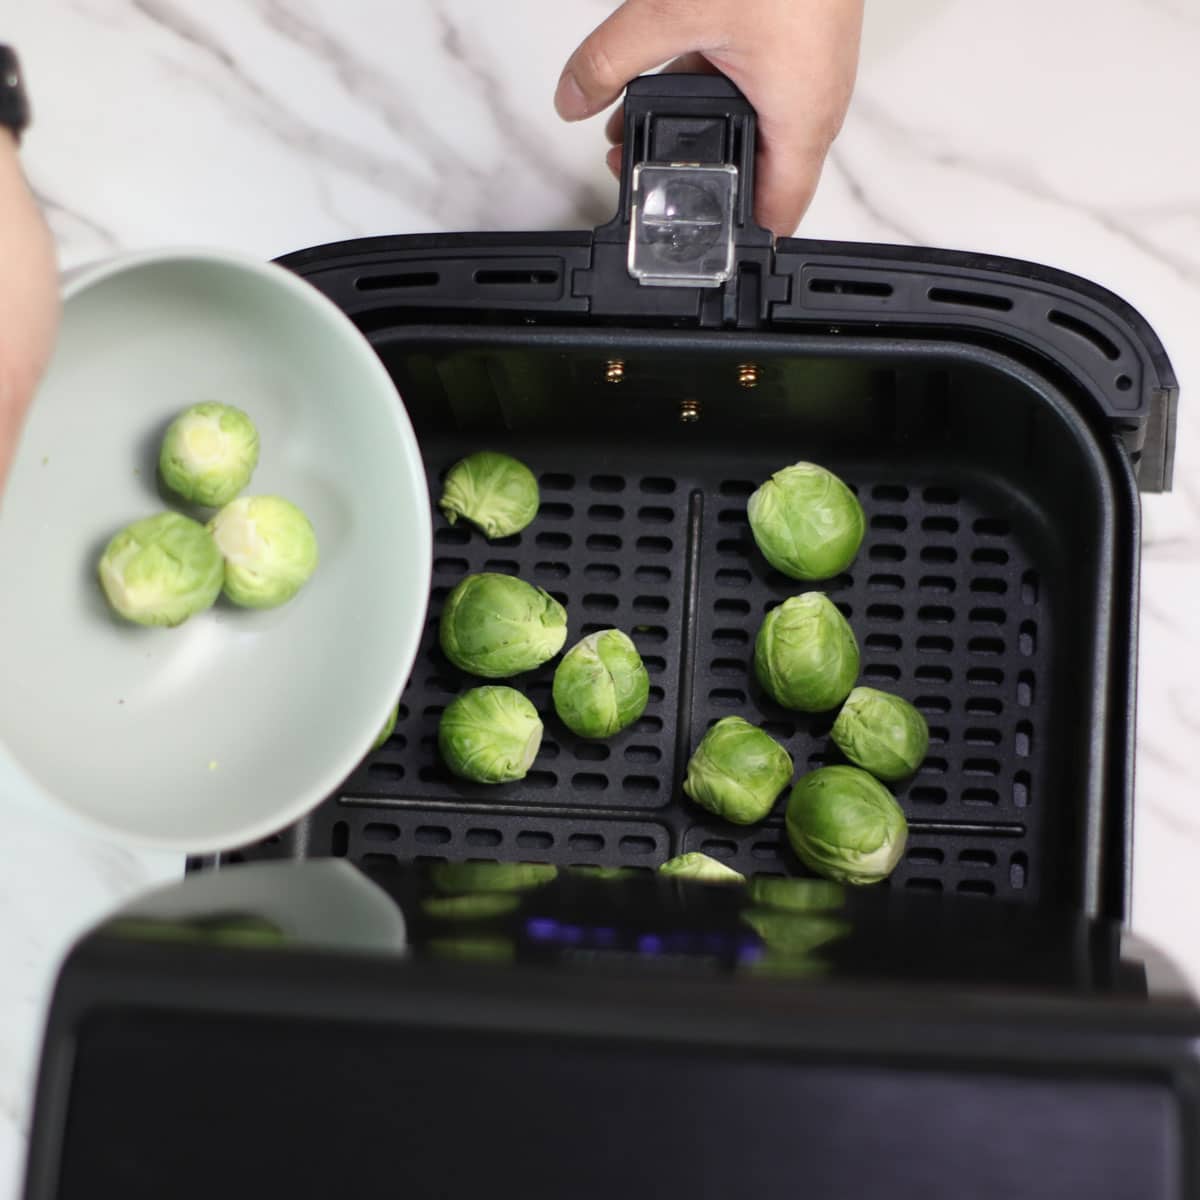 Air frying whole Brussels sprouts